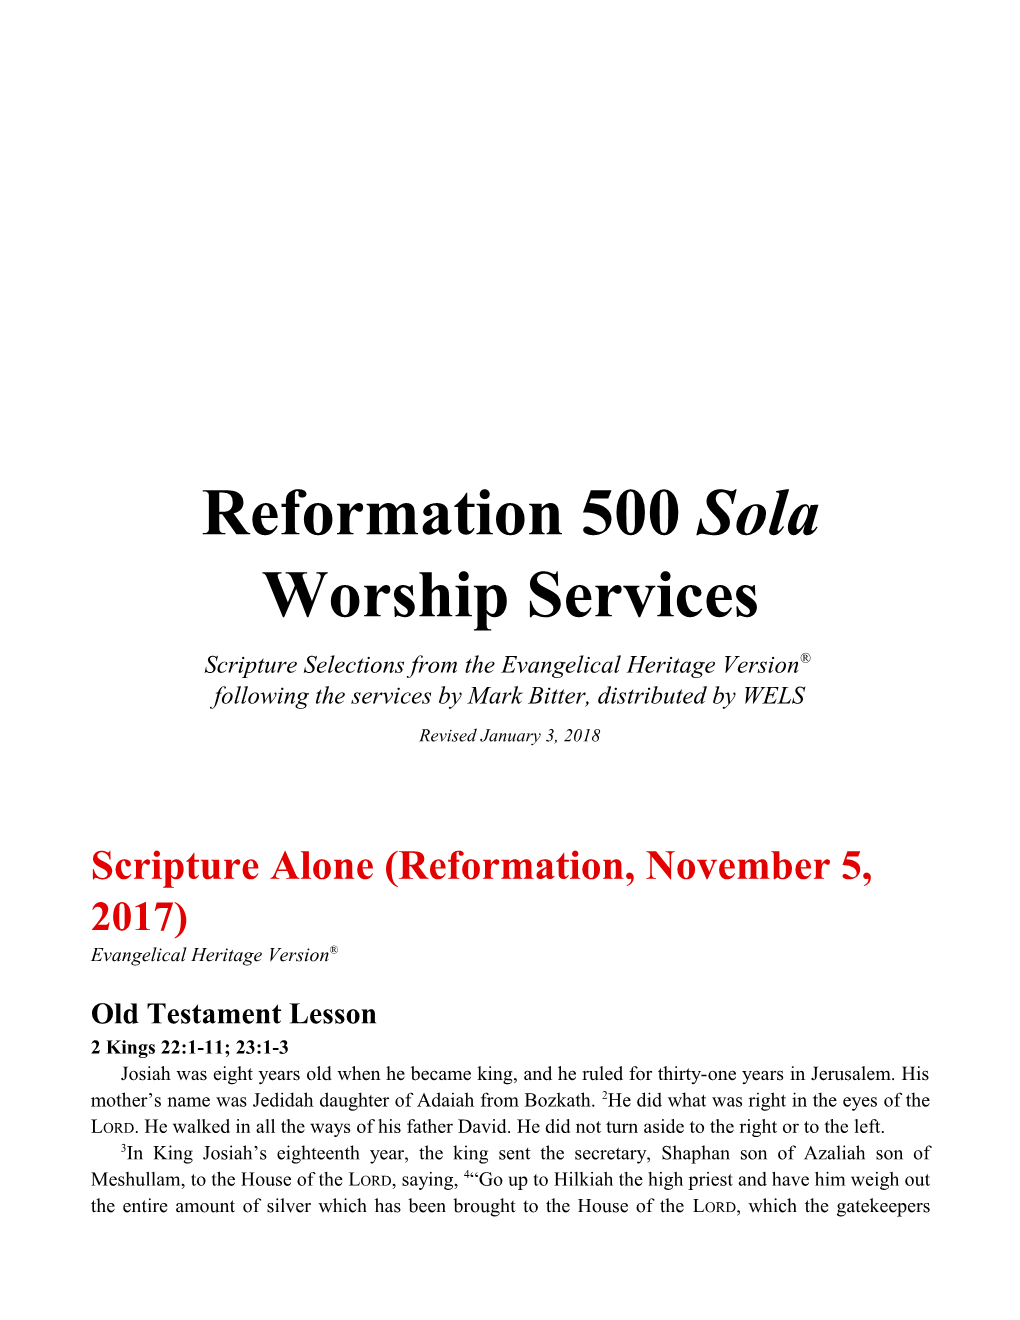 Reformation 500 Sola Worship Services